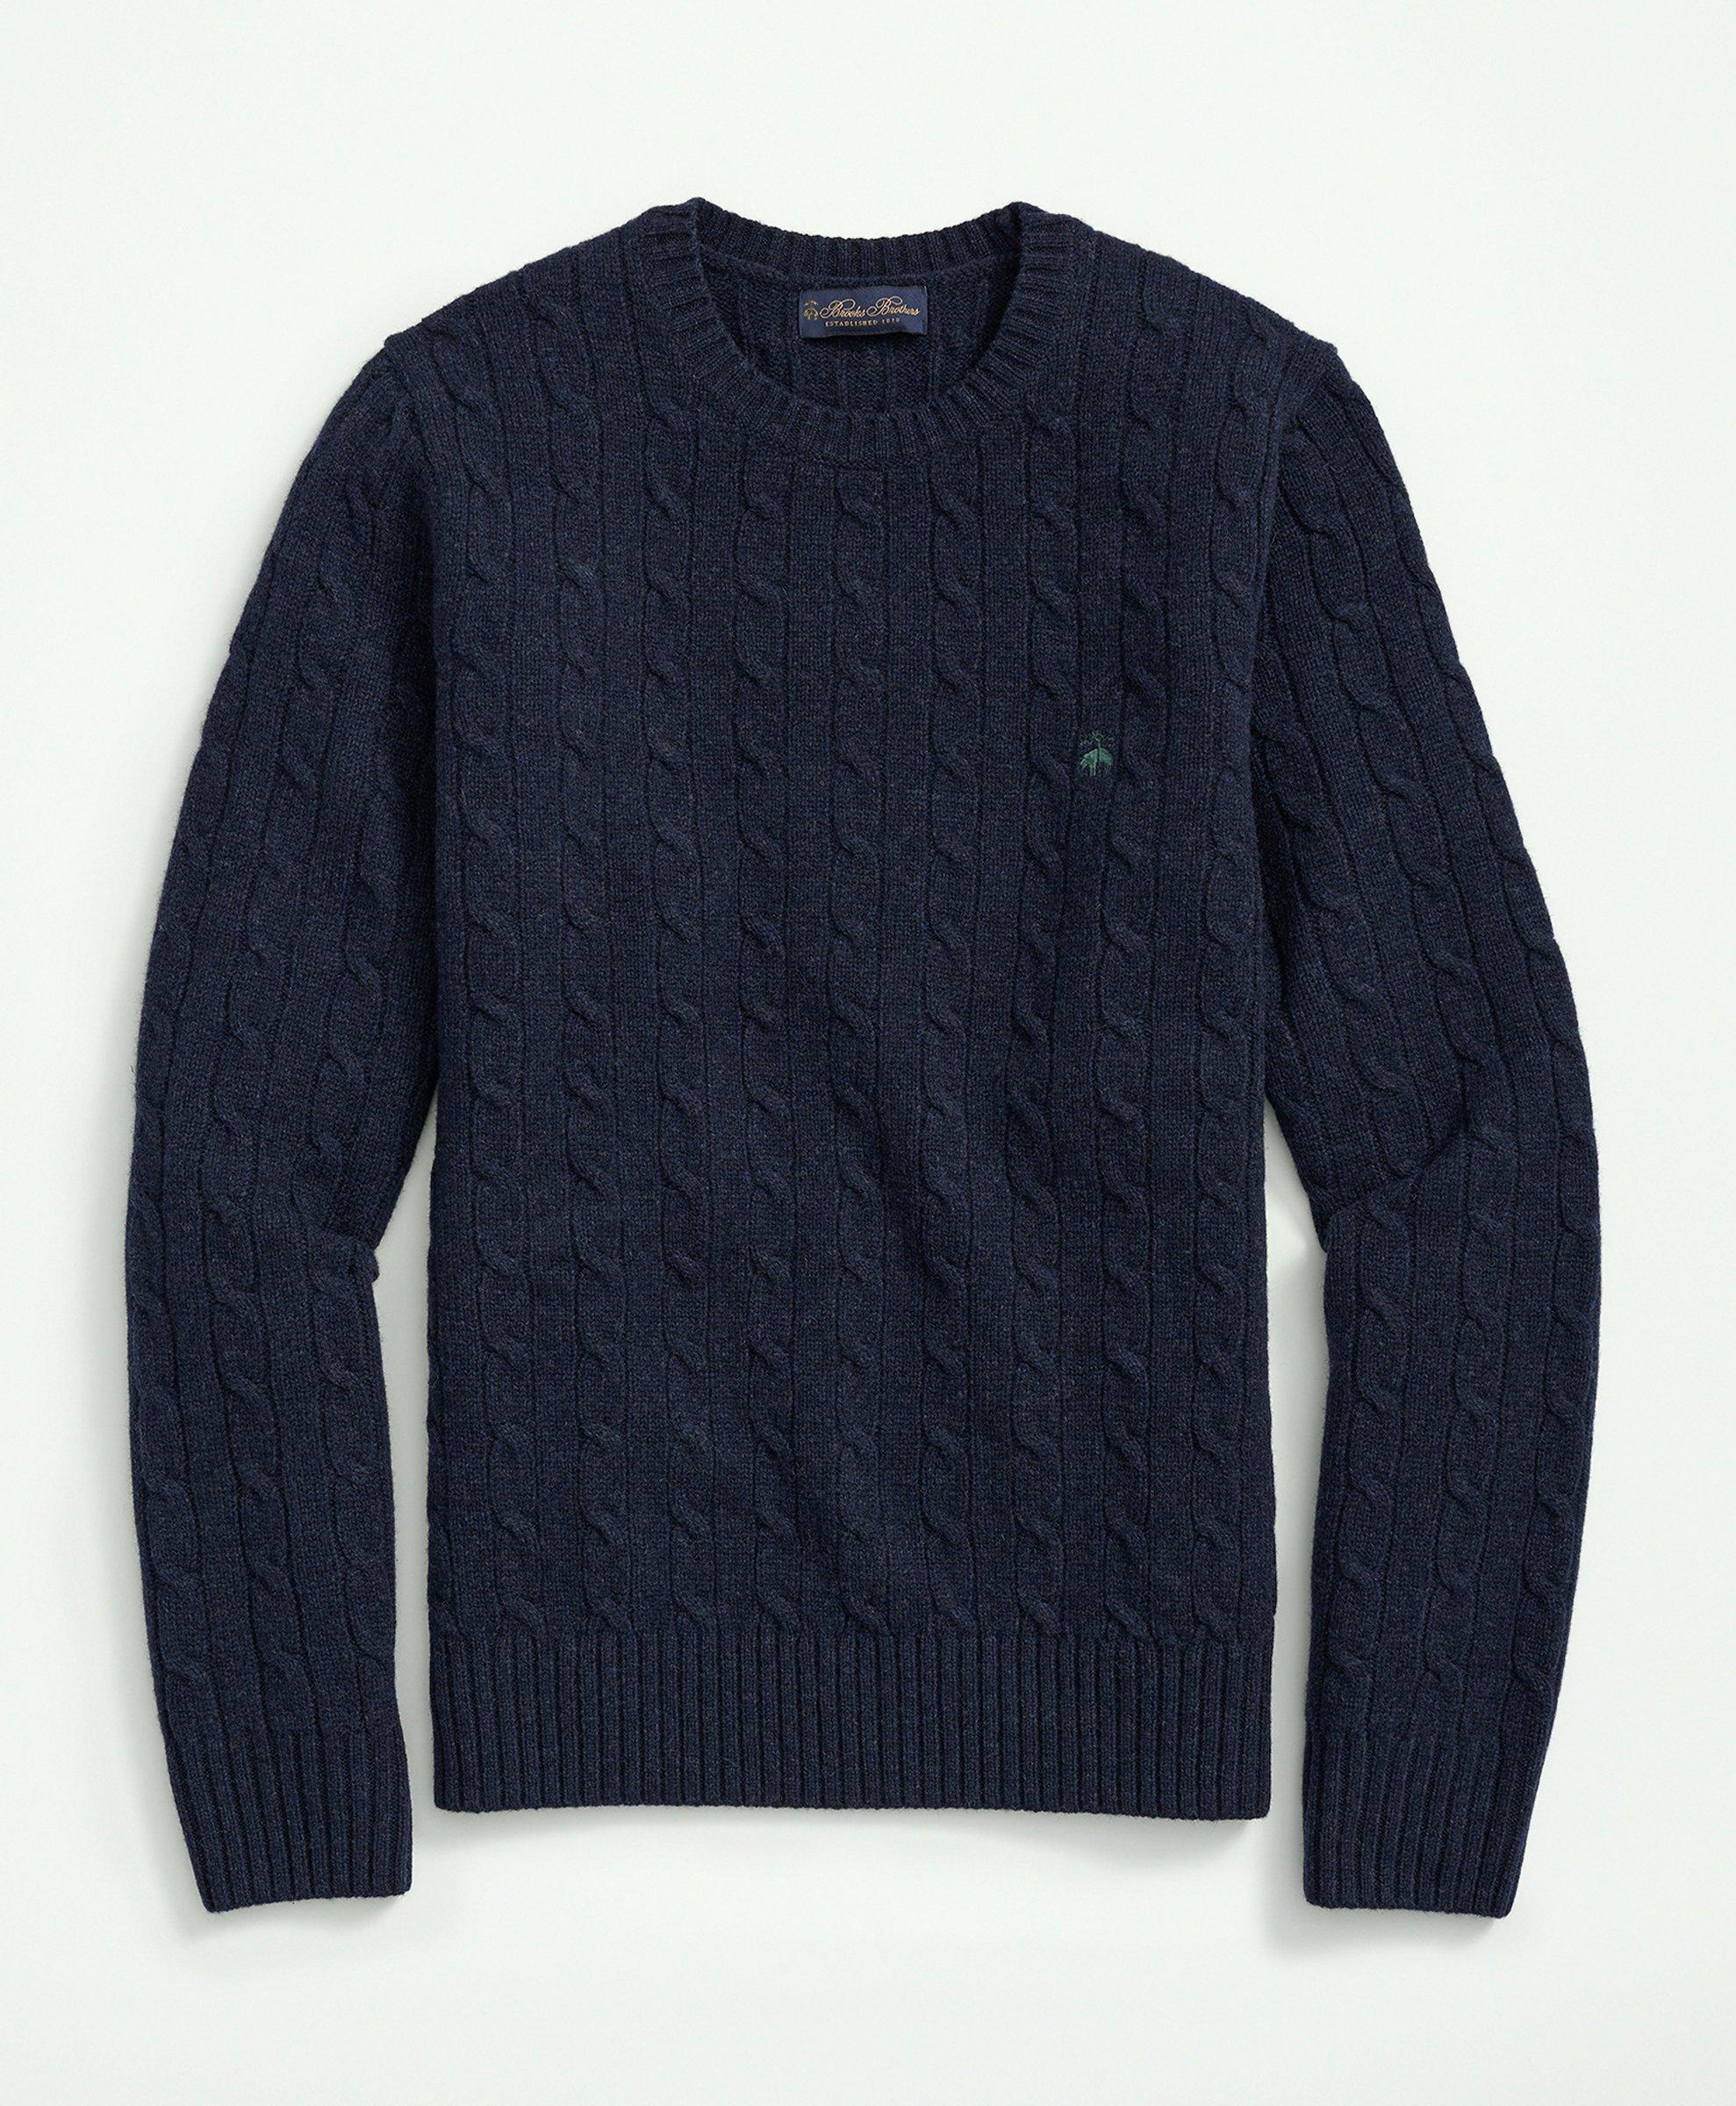 Lambswool Cable Knit Crewneck Sweater